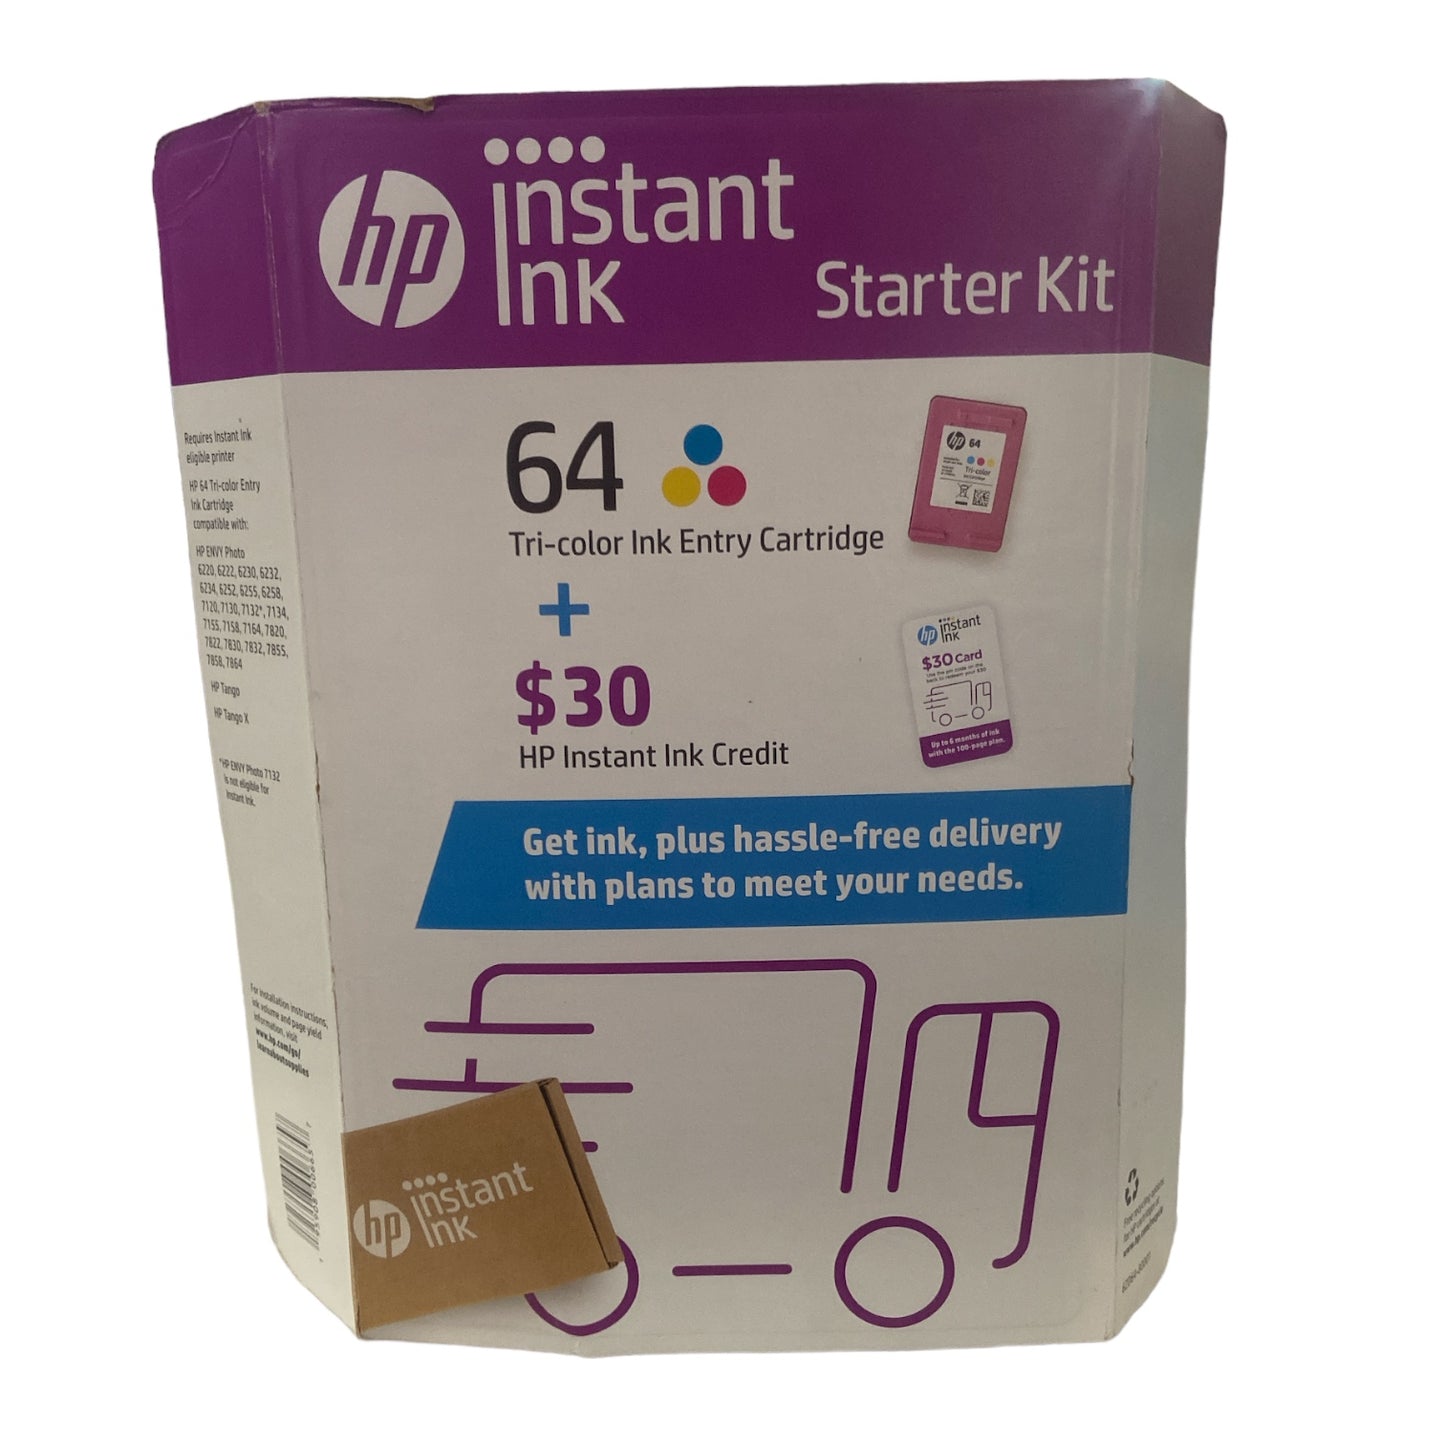 HP 64 Tricolor Instant Ink Starter Kit with $30 HP Ink Credit